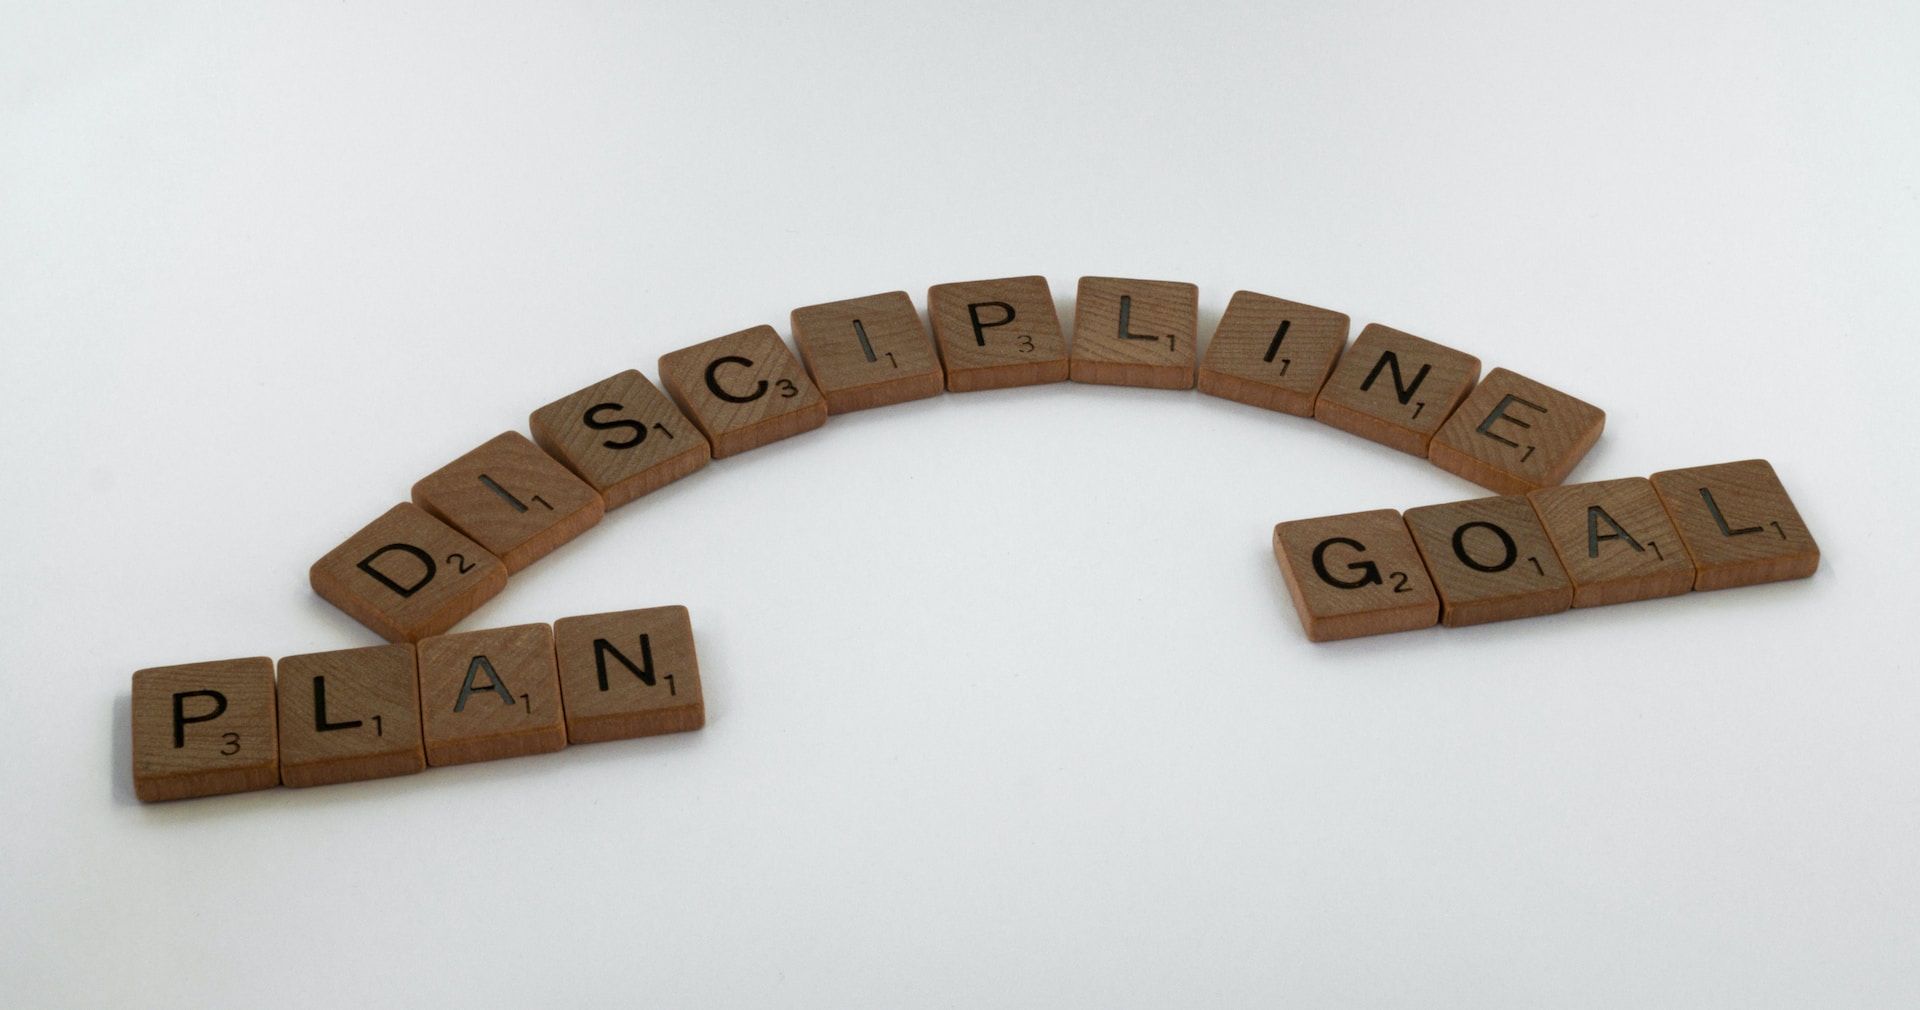 scrabble pieces spelling 3 words. Gain, Goal and Discipline